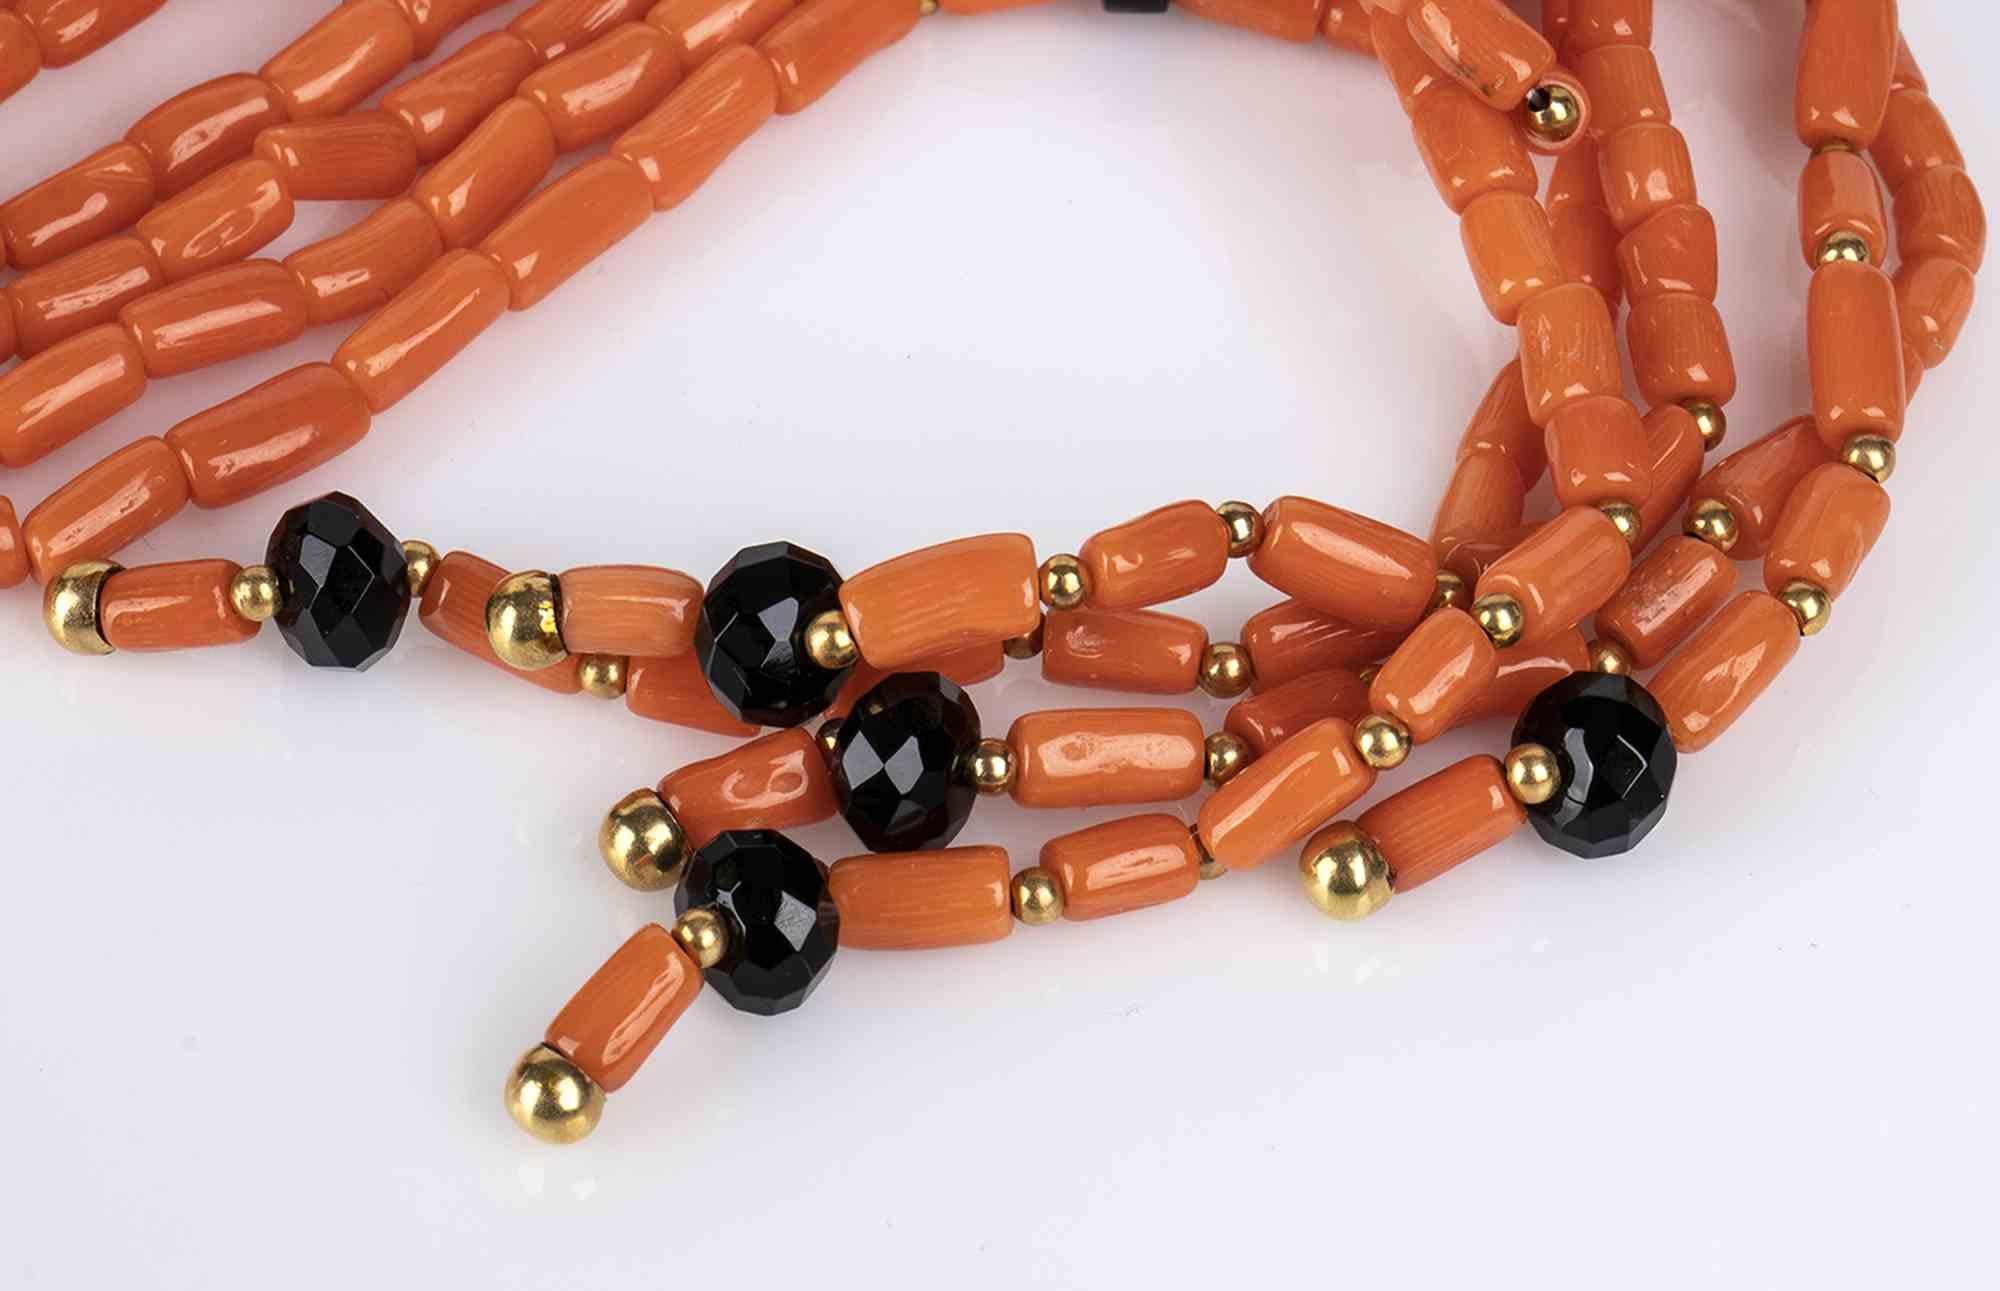 Mediterranean coral and onyx scarf necklace

18k yellow gold, Mediterranean coral beads (corallium rubrum) with onyx insert. Length 63 cm, coral diameter 3.5-4 mm. Weight 82.2 gr.
Item condition grading: ***** excellent.